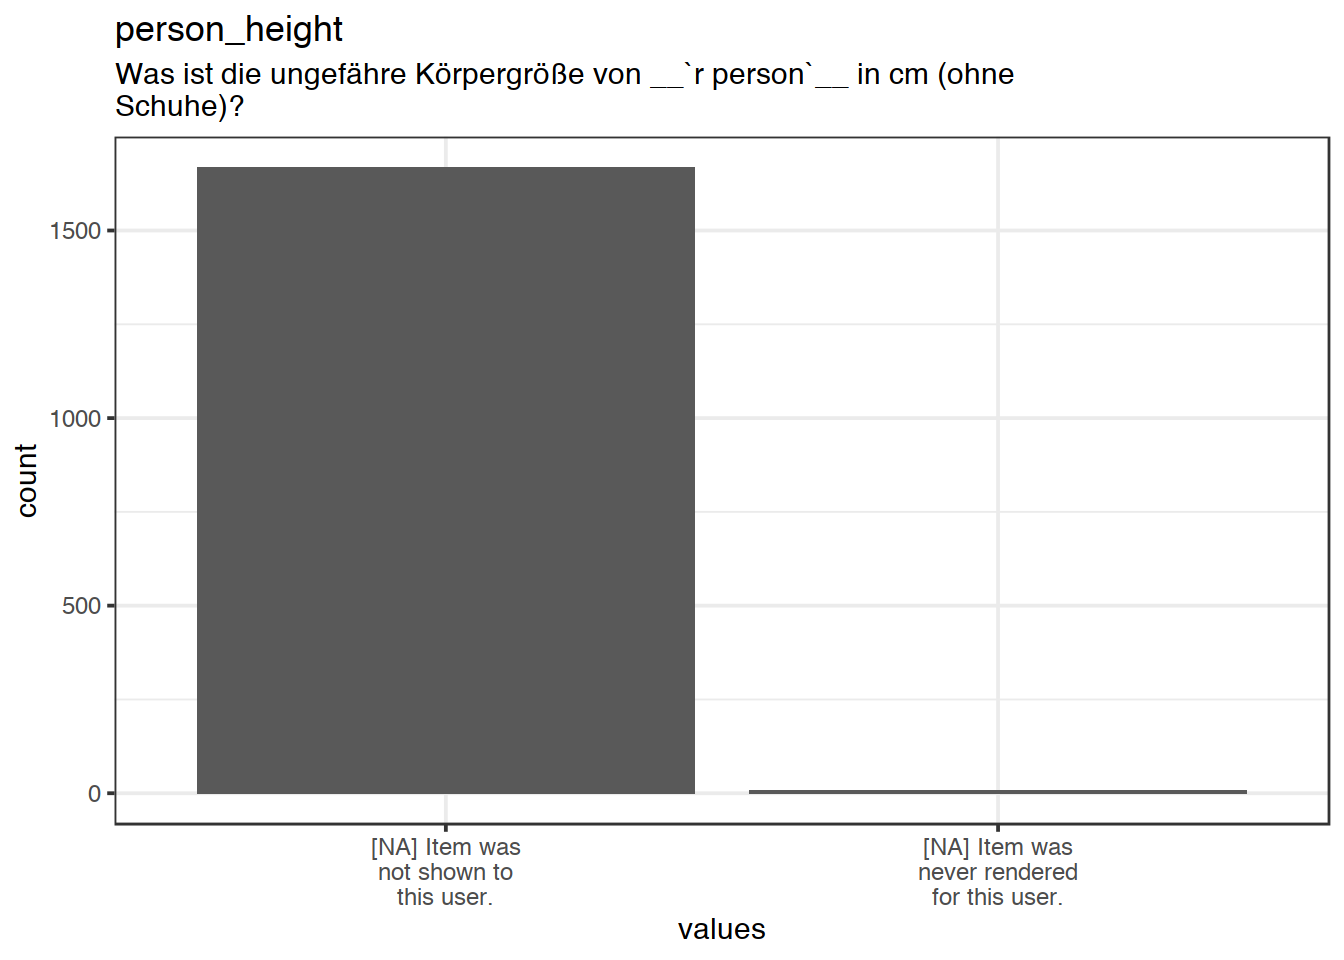 Plot of missing values for person_height